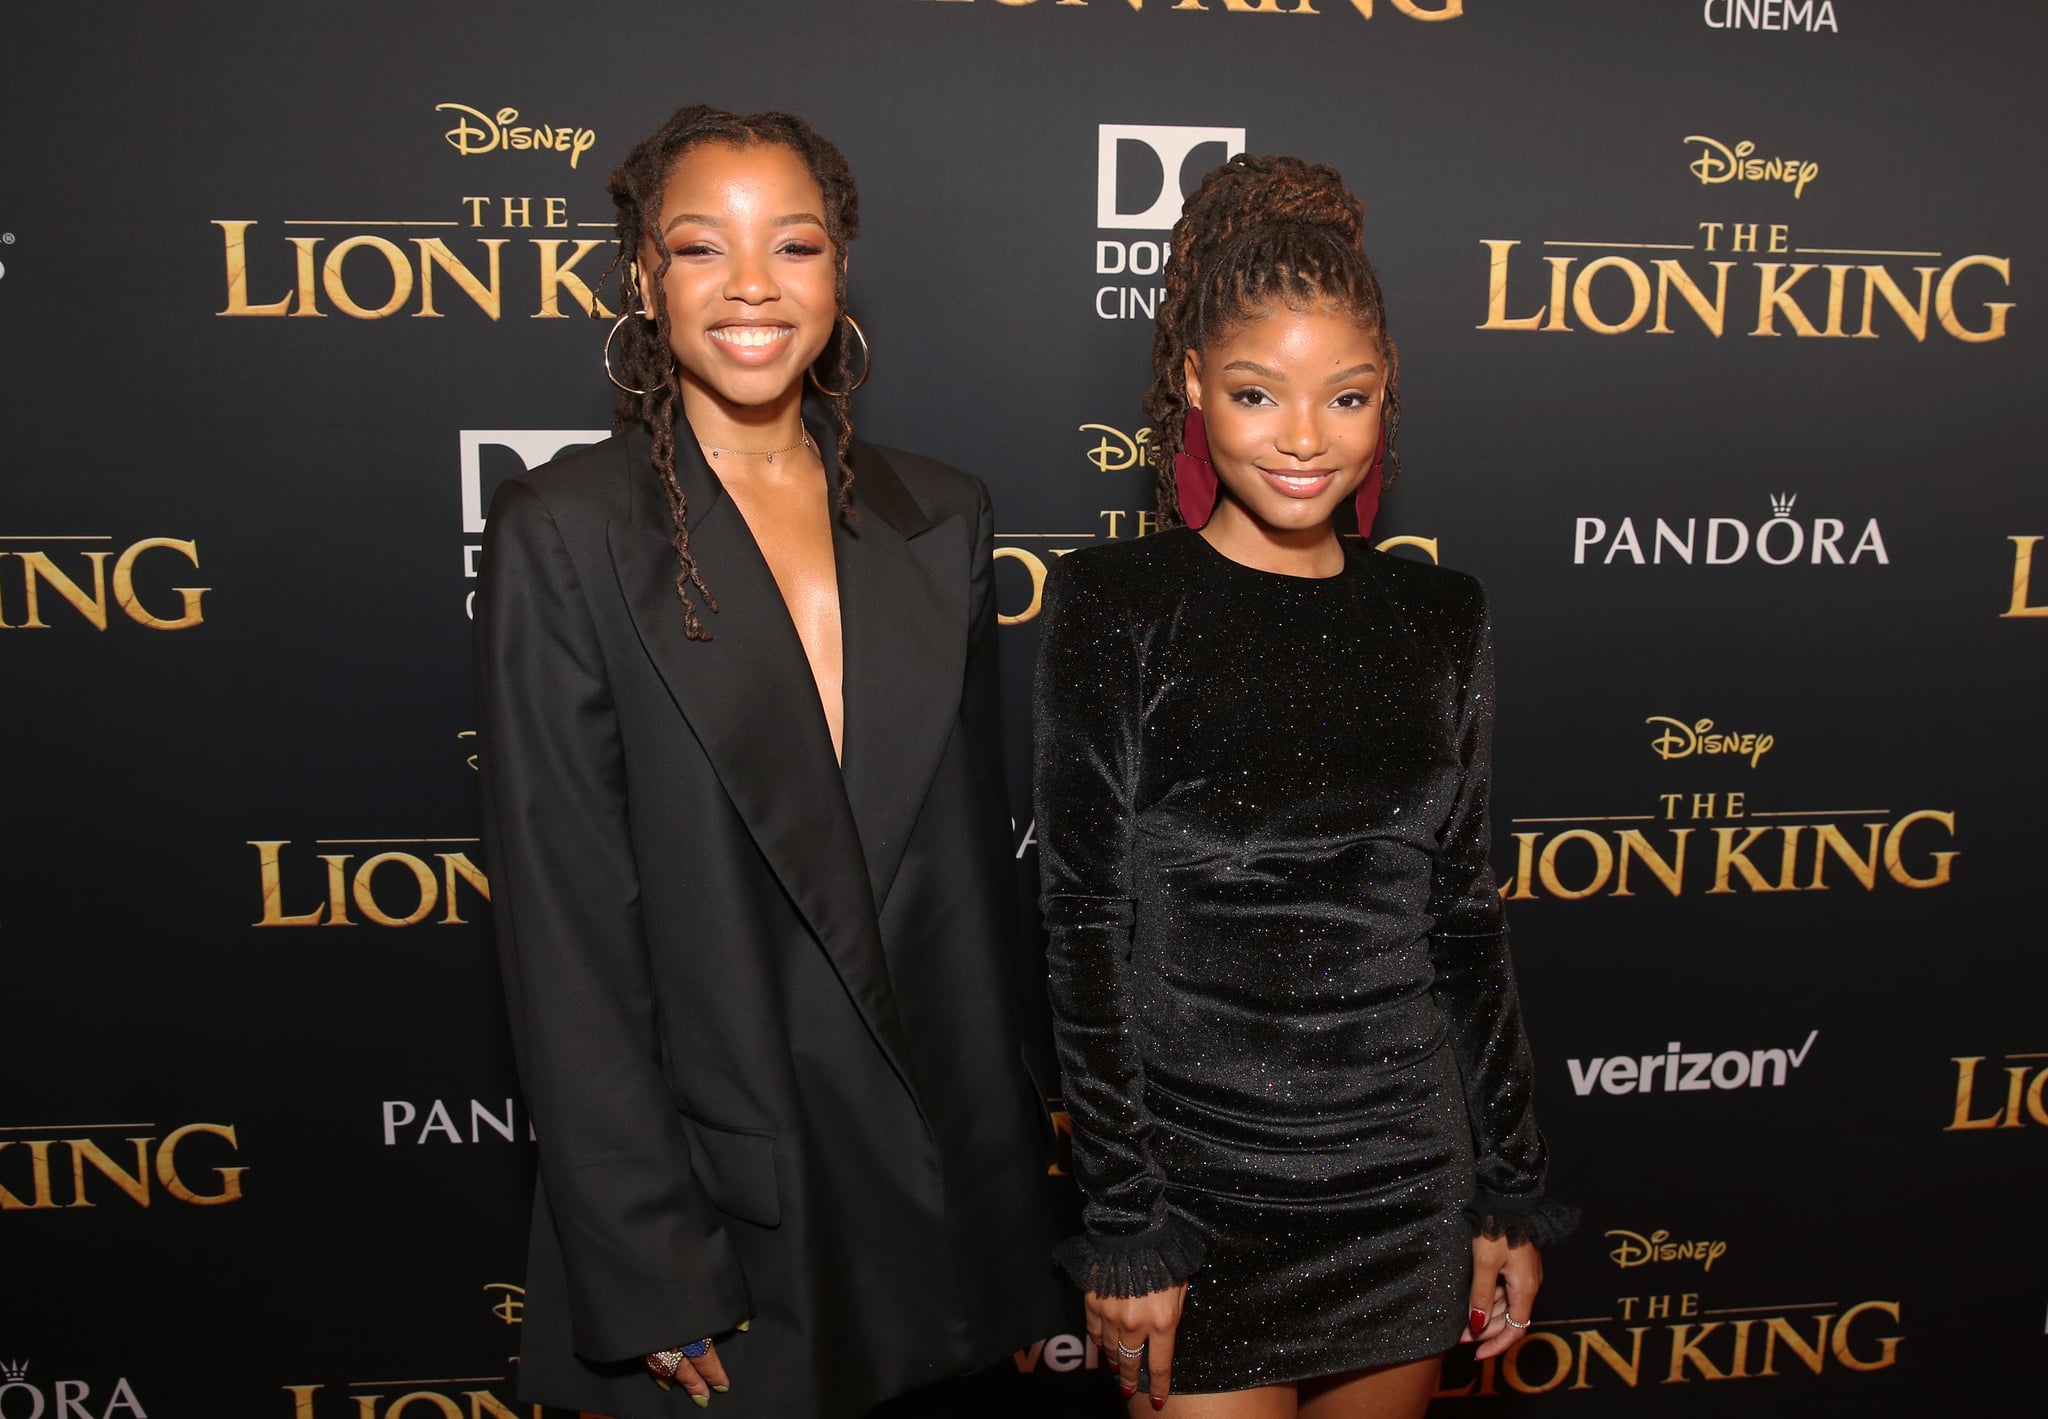 HOLLYWOOD, CALIFORNIA - JULY 09: Chloe Bailey (L) and Halle Bailey attend the World Premiere of Disney